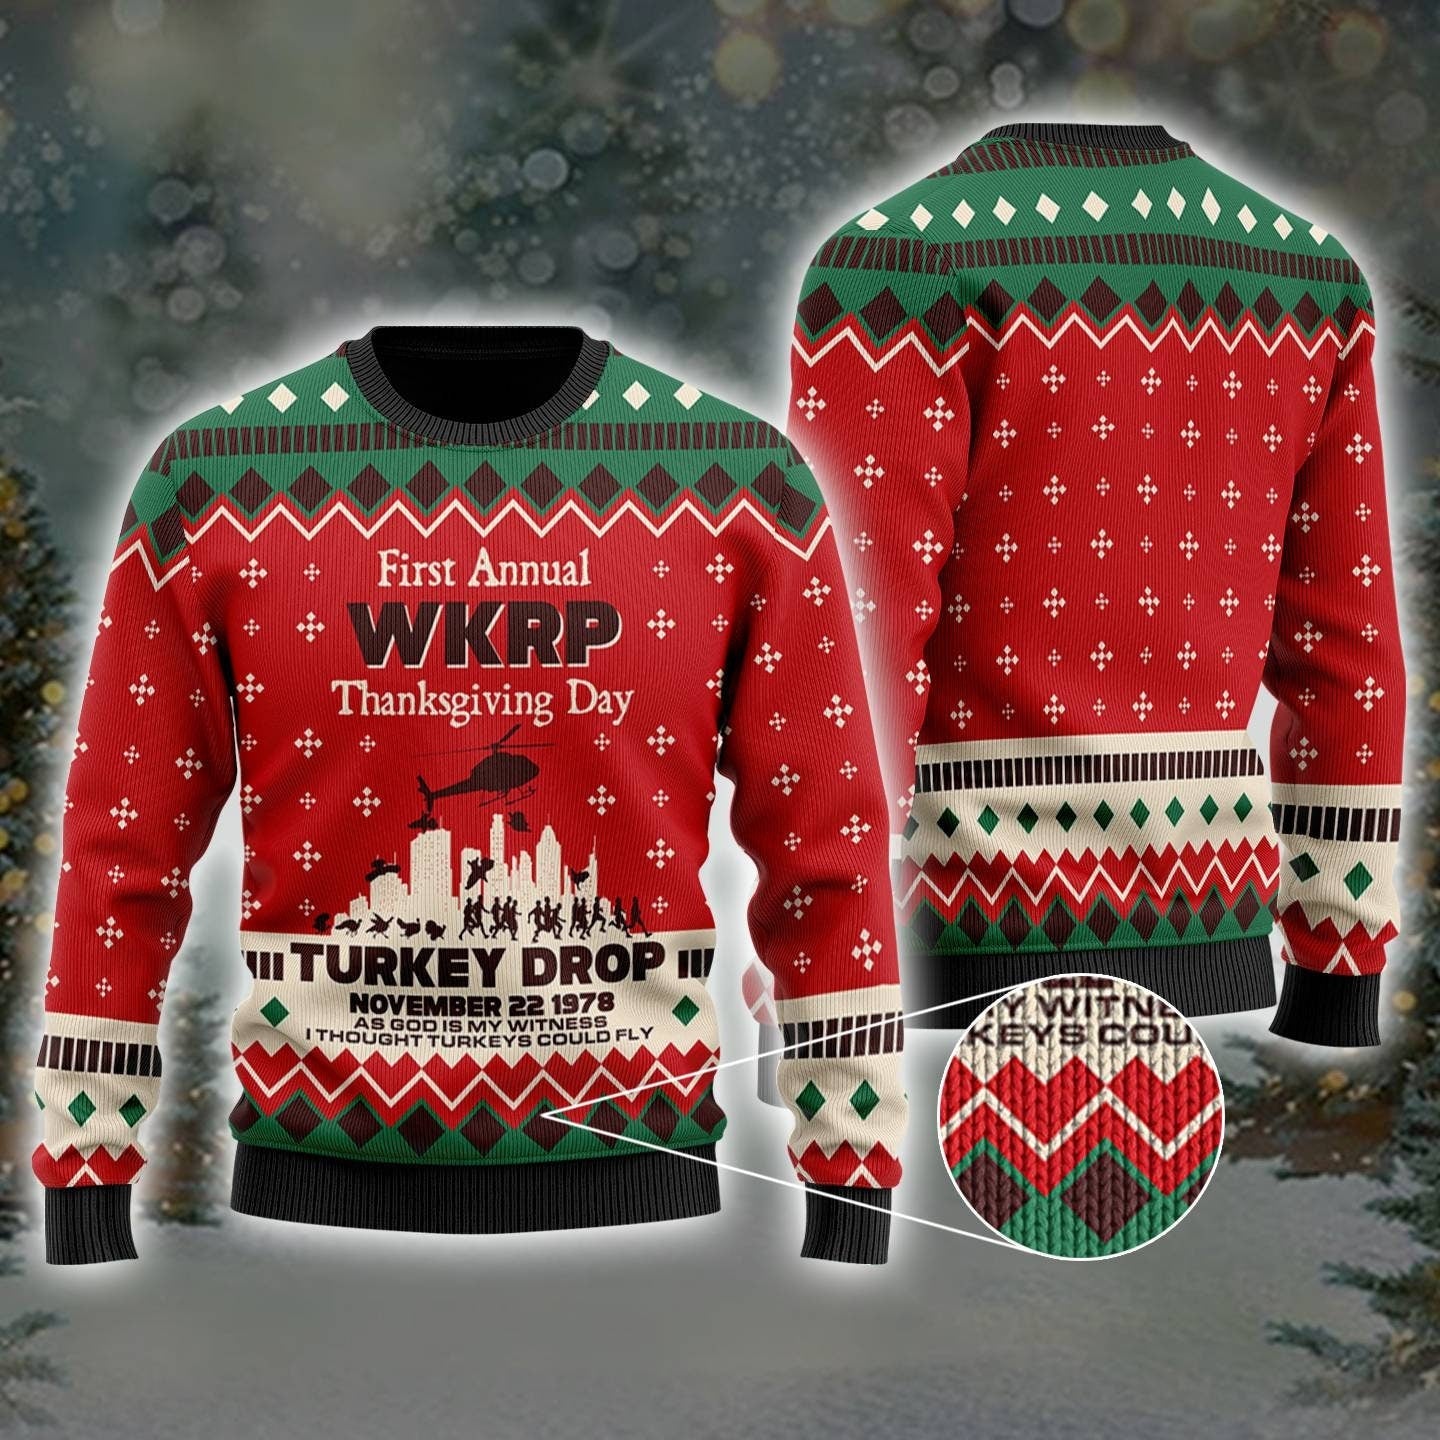 First Annual WKRP Thanksgiving Day Turkey Drop November 22 1978 - Ugly Sweater